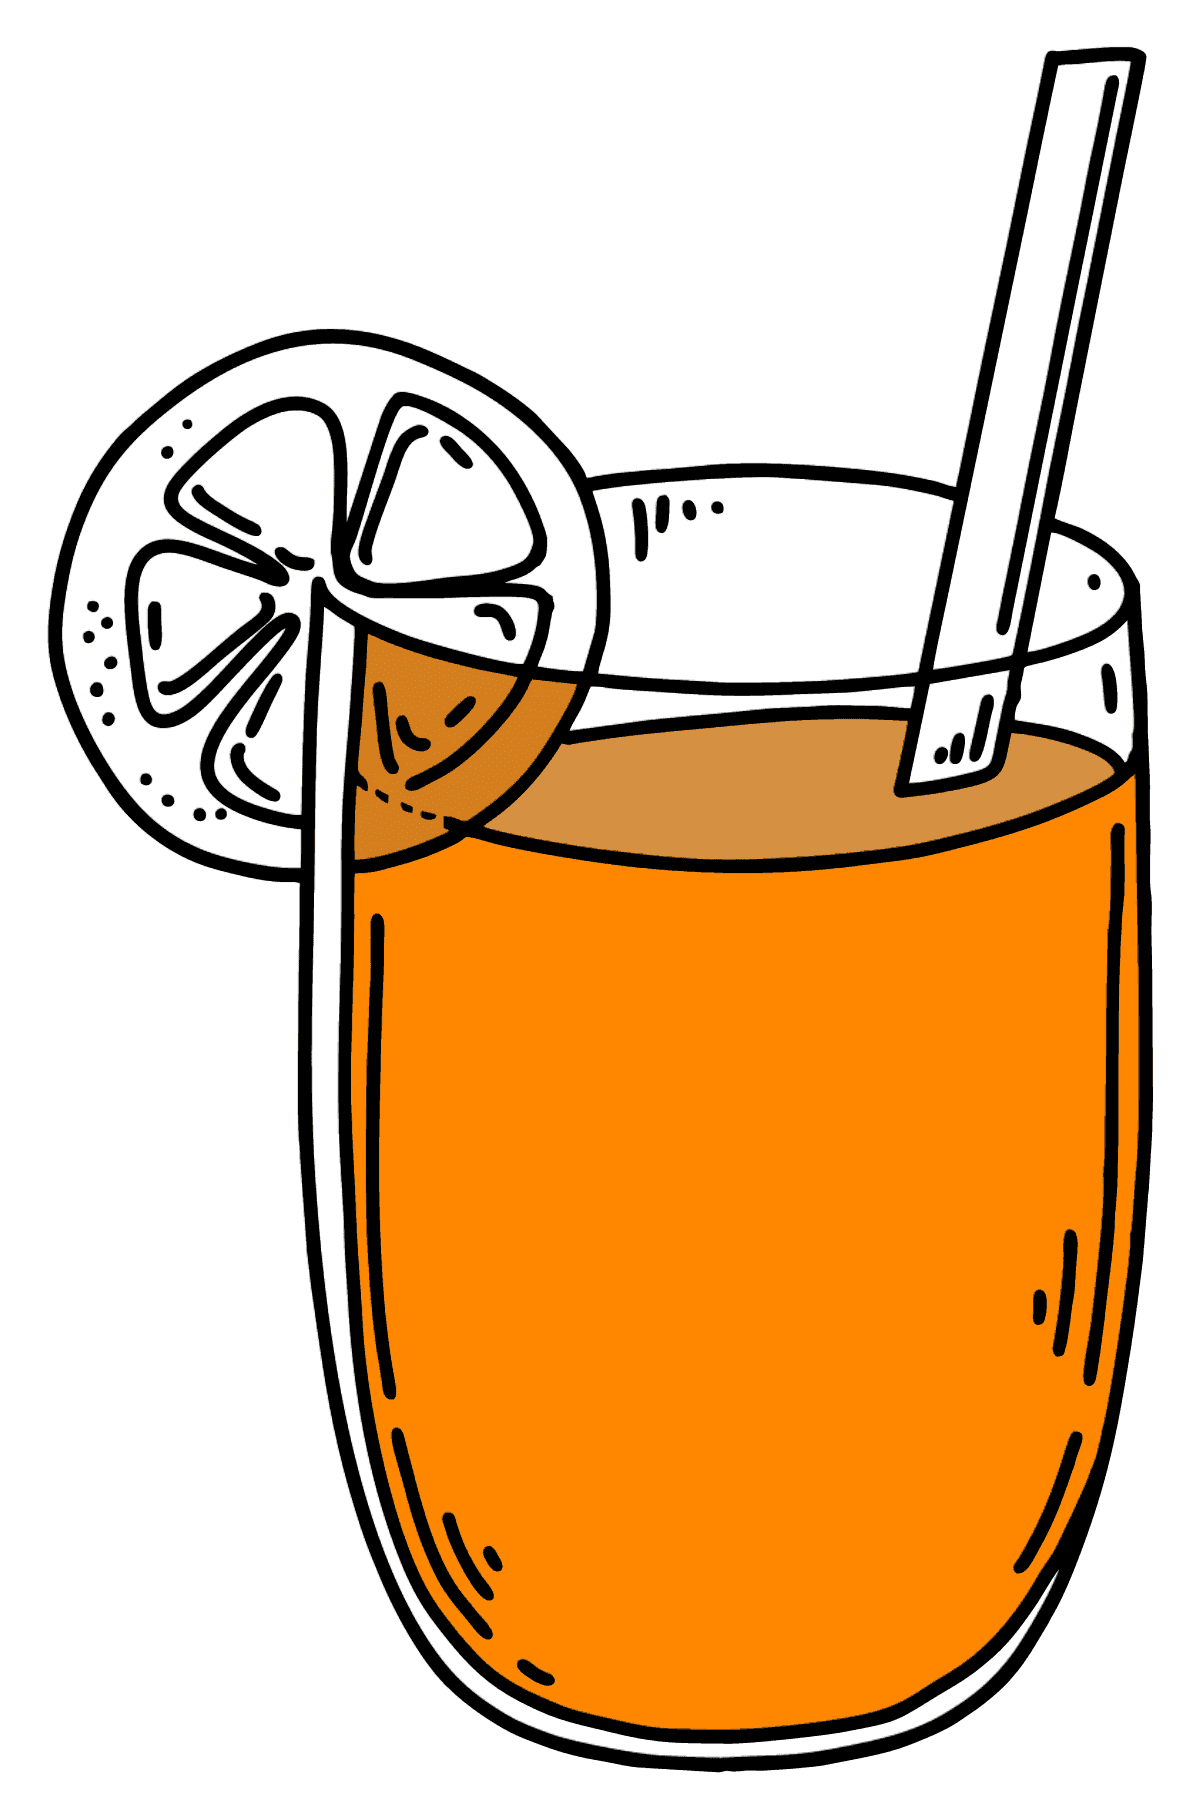 Coloring page - glass of juice - Coloring Pages for Kids